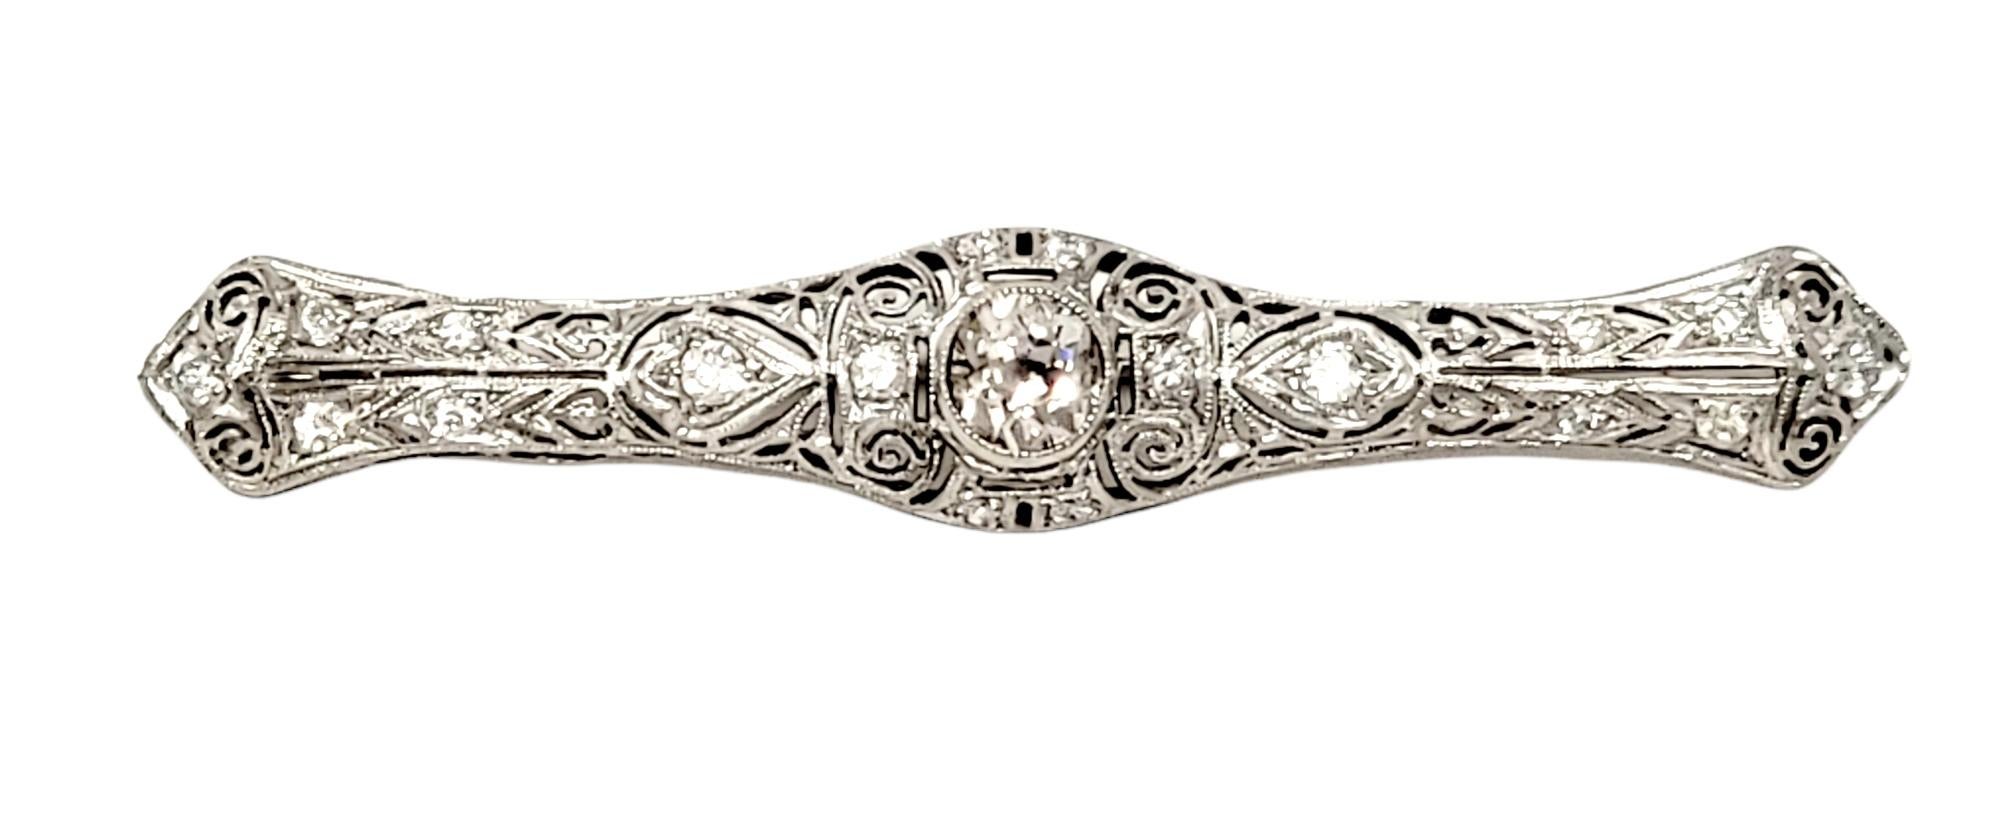 Exquisite vintage bar pin with dazzling diamond details. This gorgeous pin will elevate any look that it is paired with. Add to your favorite jacket, dress or scarf for an instant touch of elegance. The stunning pin features a single Old Mine Cut